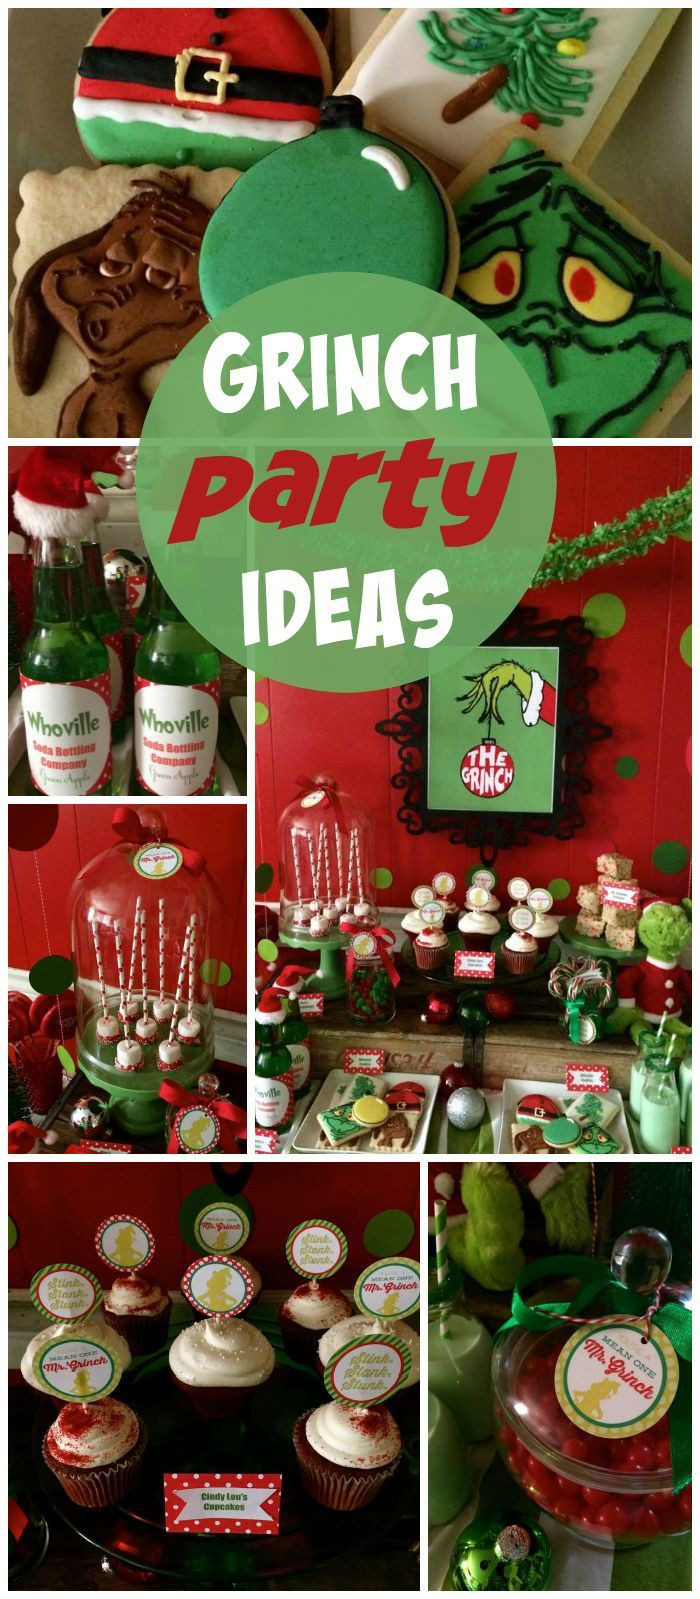 Grinch Christmas Party Ideas
 The Grinch Christmas Holiday "Merry Grinchmas